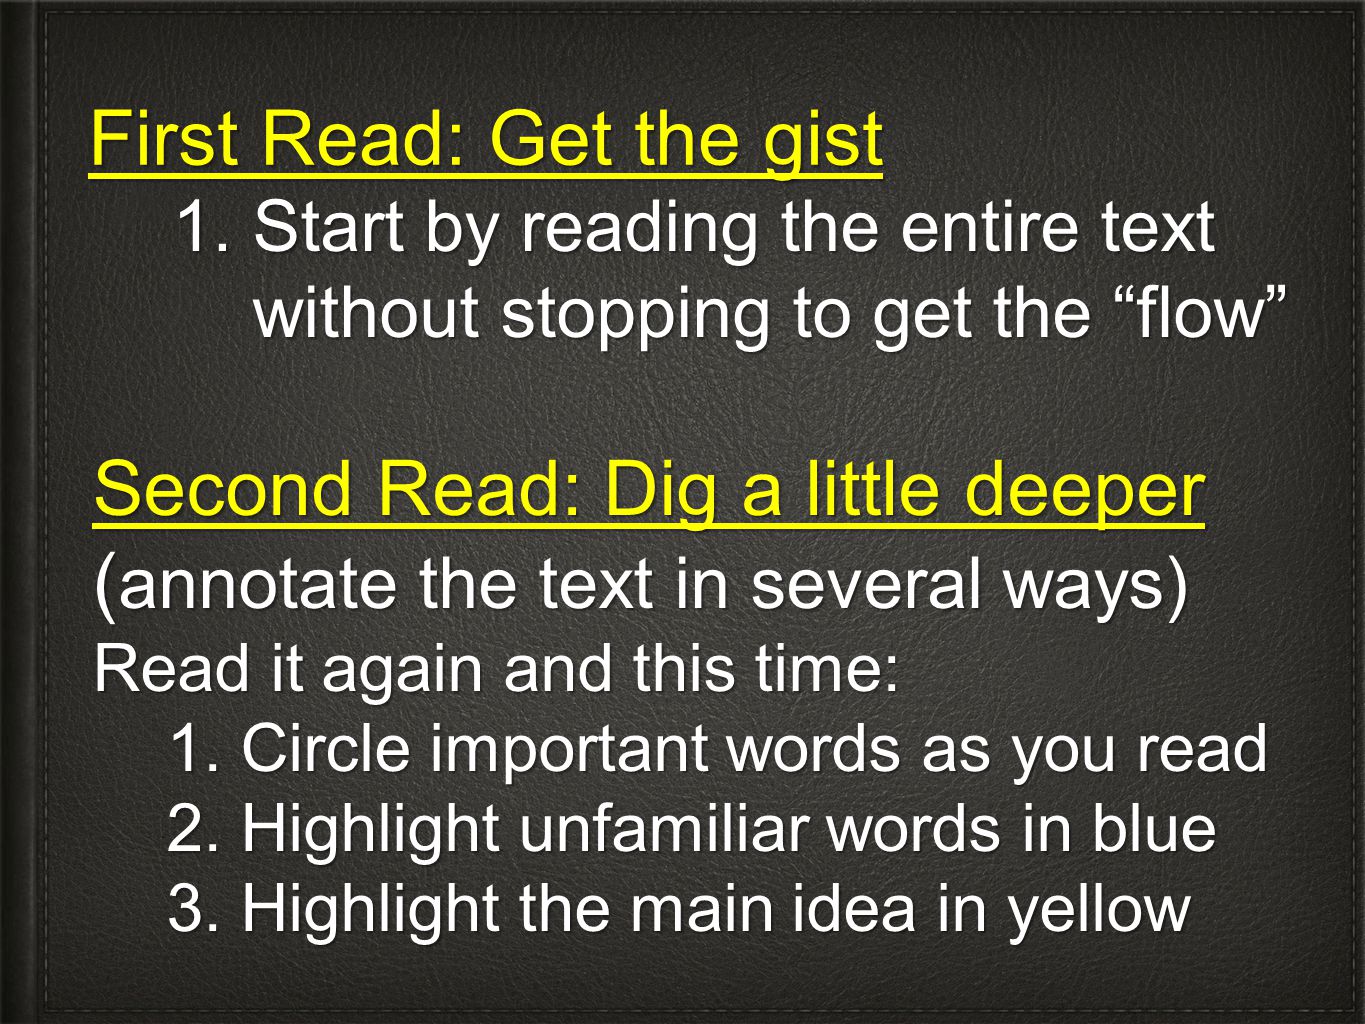 First Read: Get the gist